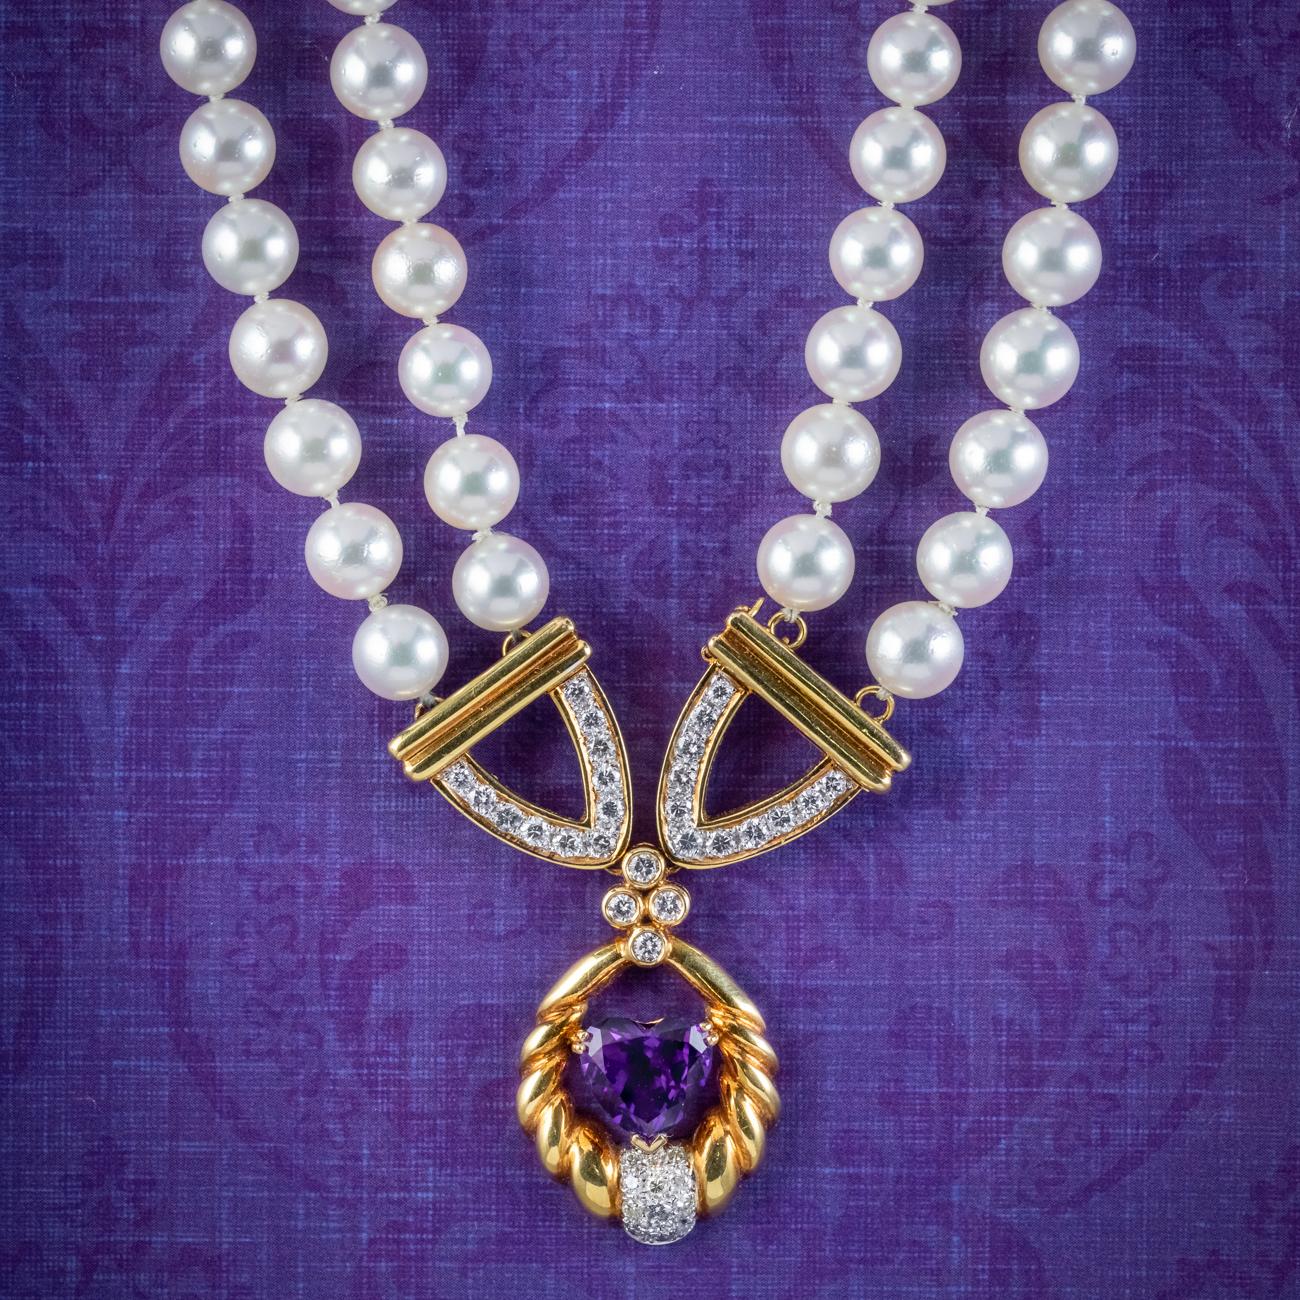 A beautiful vintage pearl lavaliere necklace from the mid 20th century featuring two strands of lustrous, white pearls leading to a fabulous 18ct gold dropper lined with pave set brilliant cut diamonds (approx. 1.60ct total) and an amethyst heart in